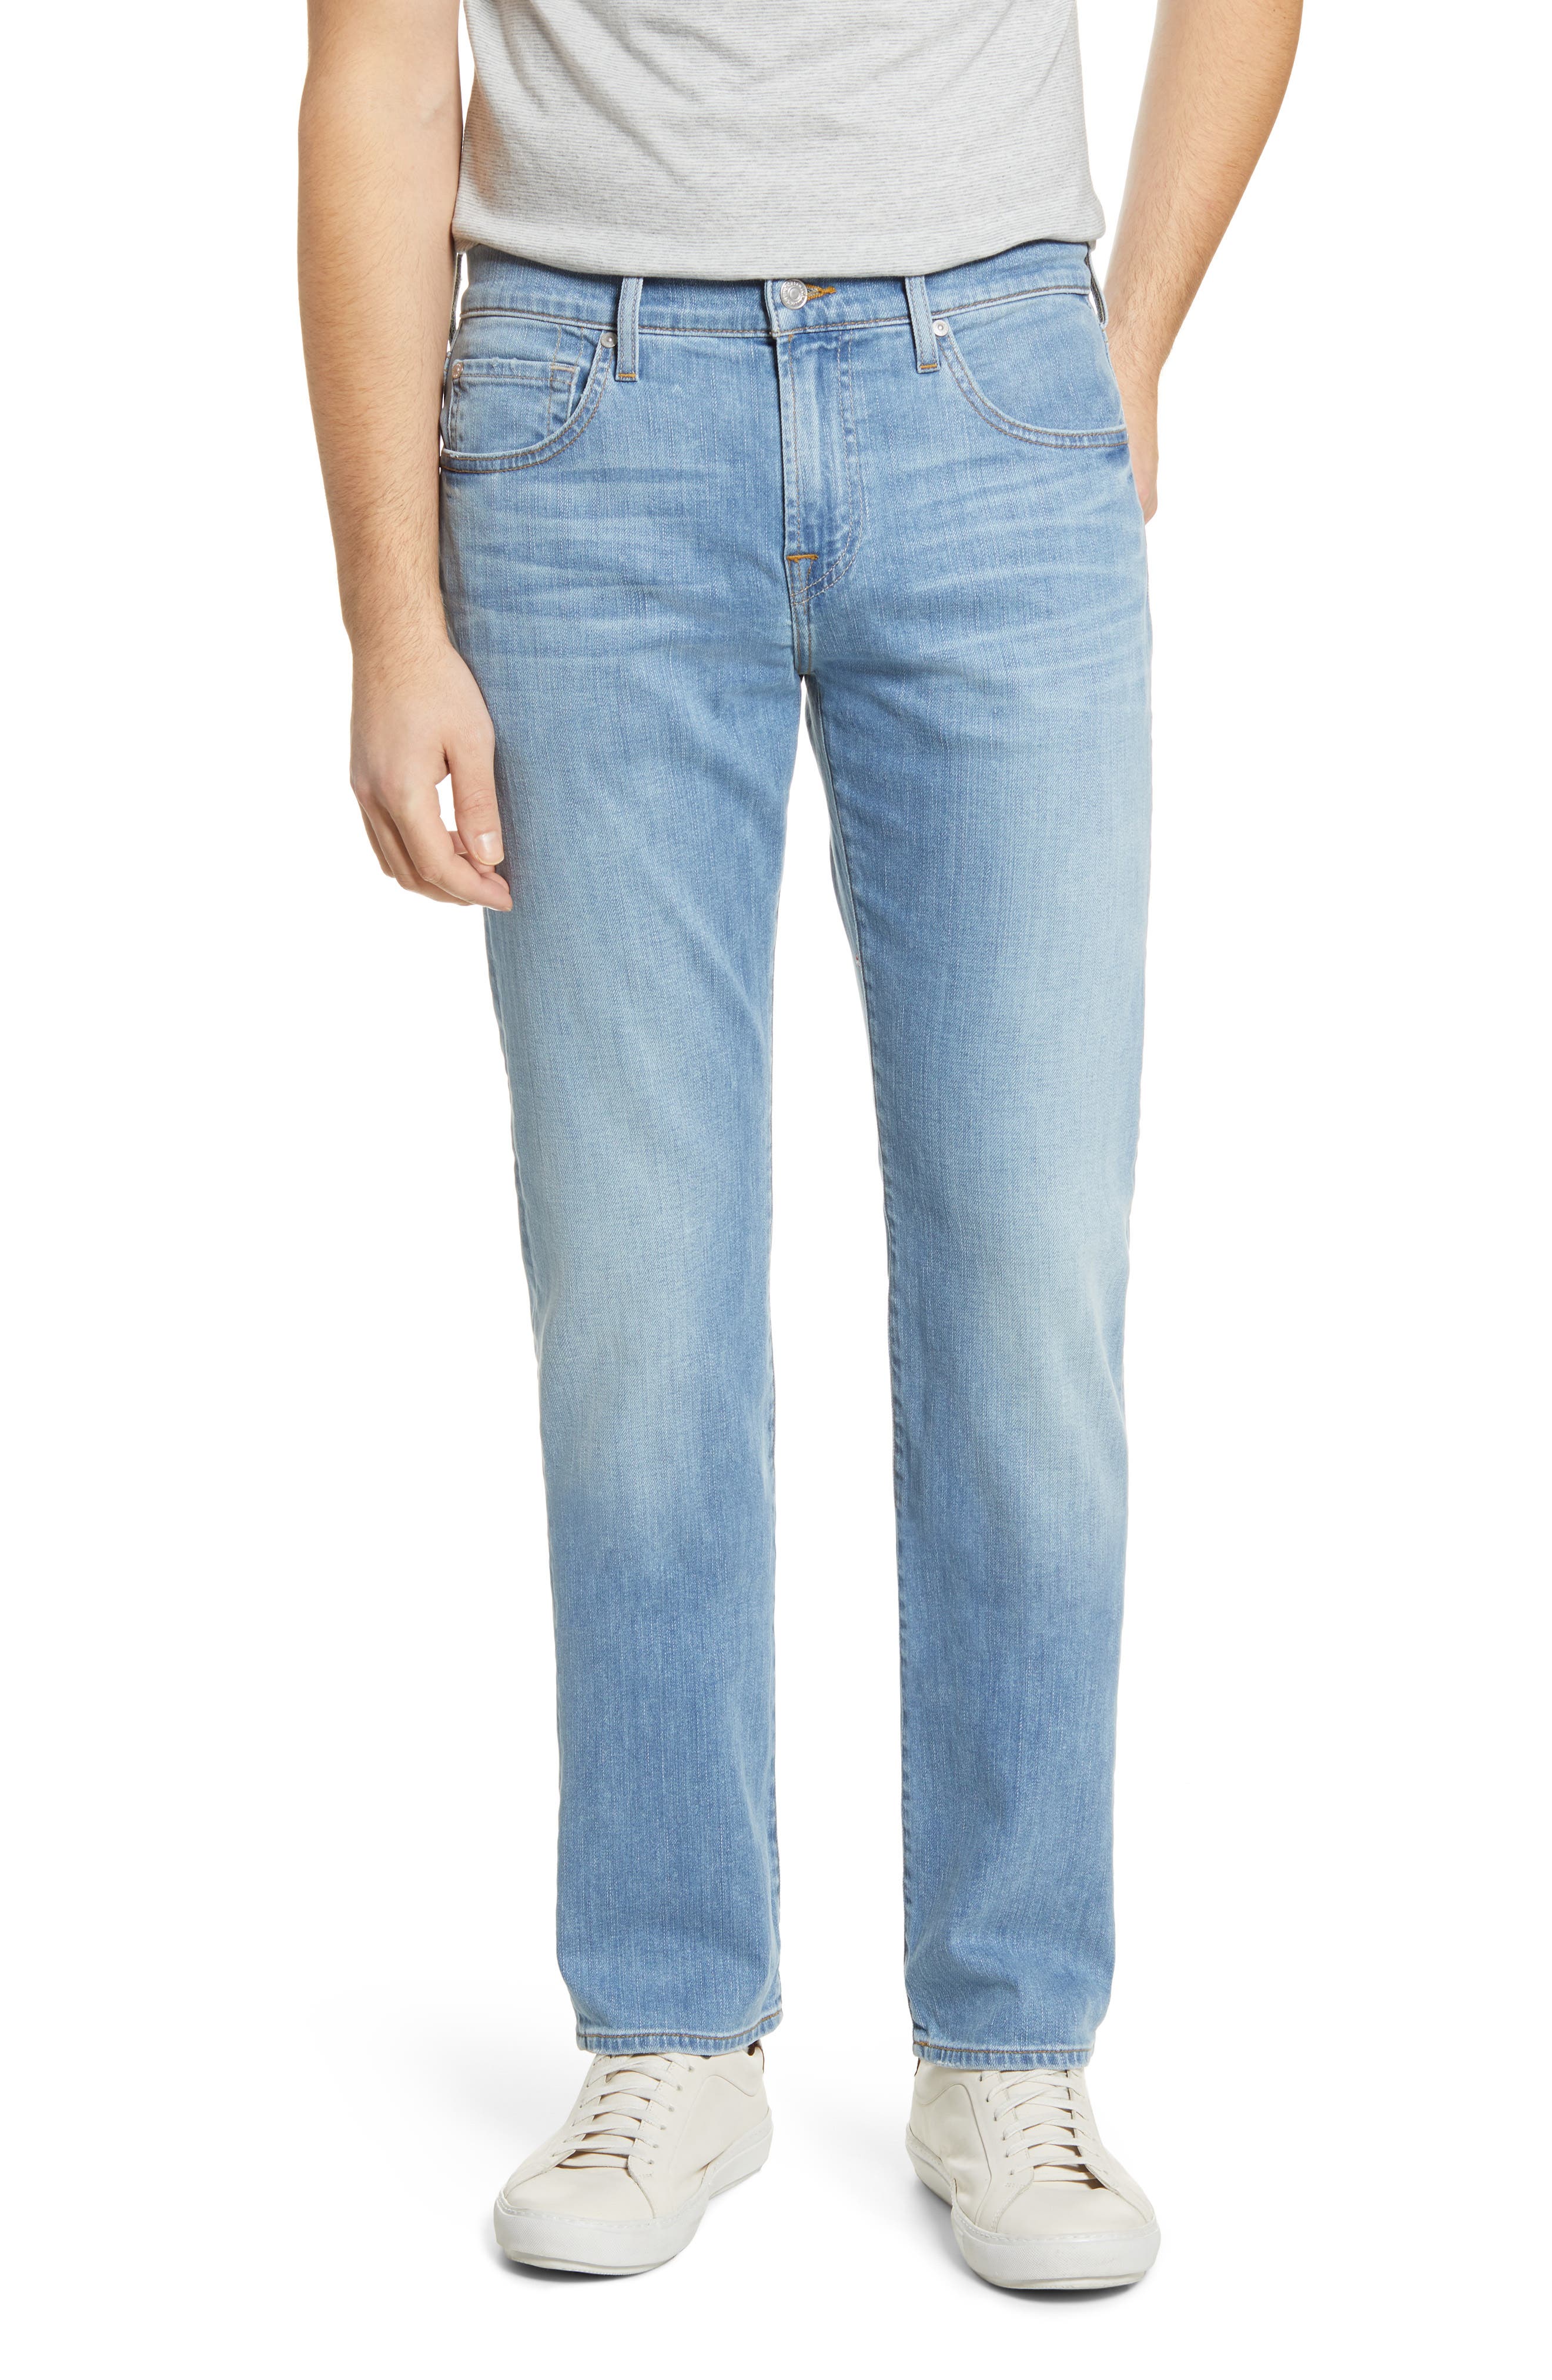 nordstrom 7 for all mankind mens jeans